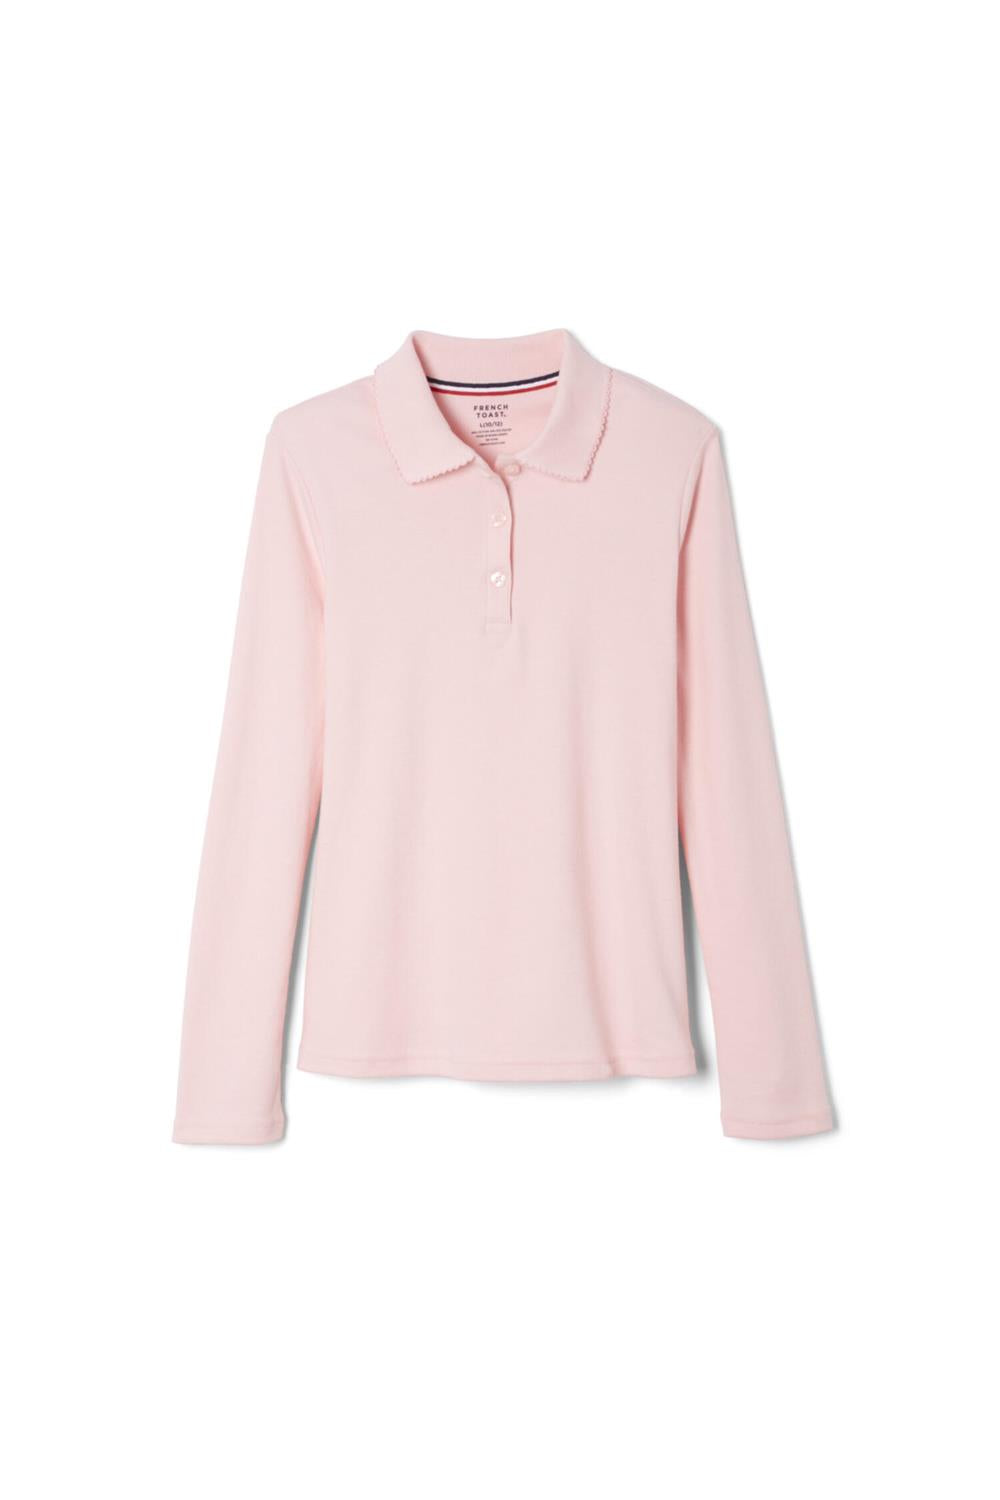 French Toast Girls 7-20 Long Sleeve Interlock Polo with Picot Collar